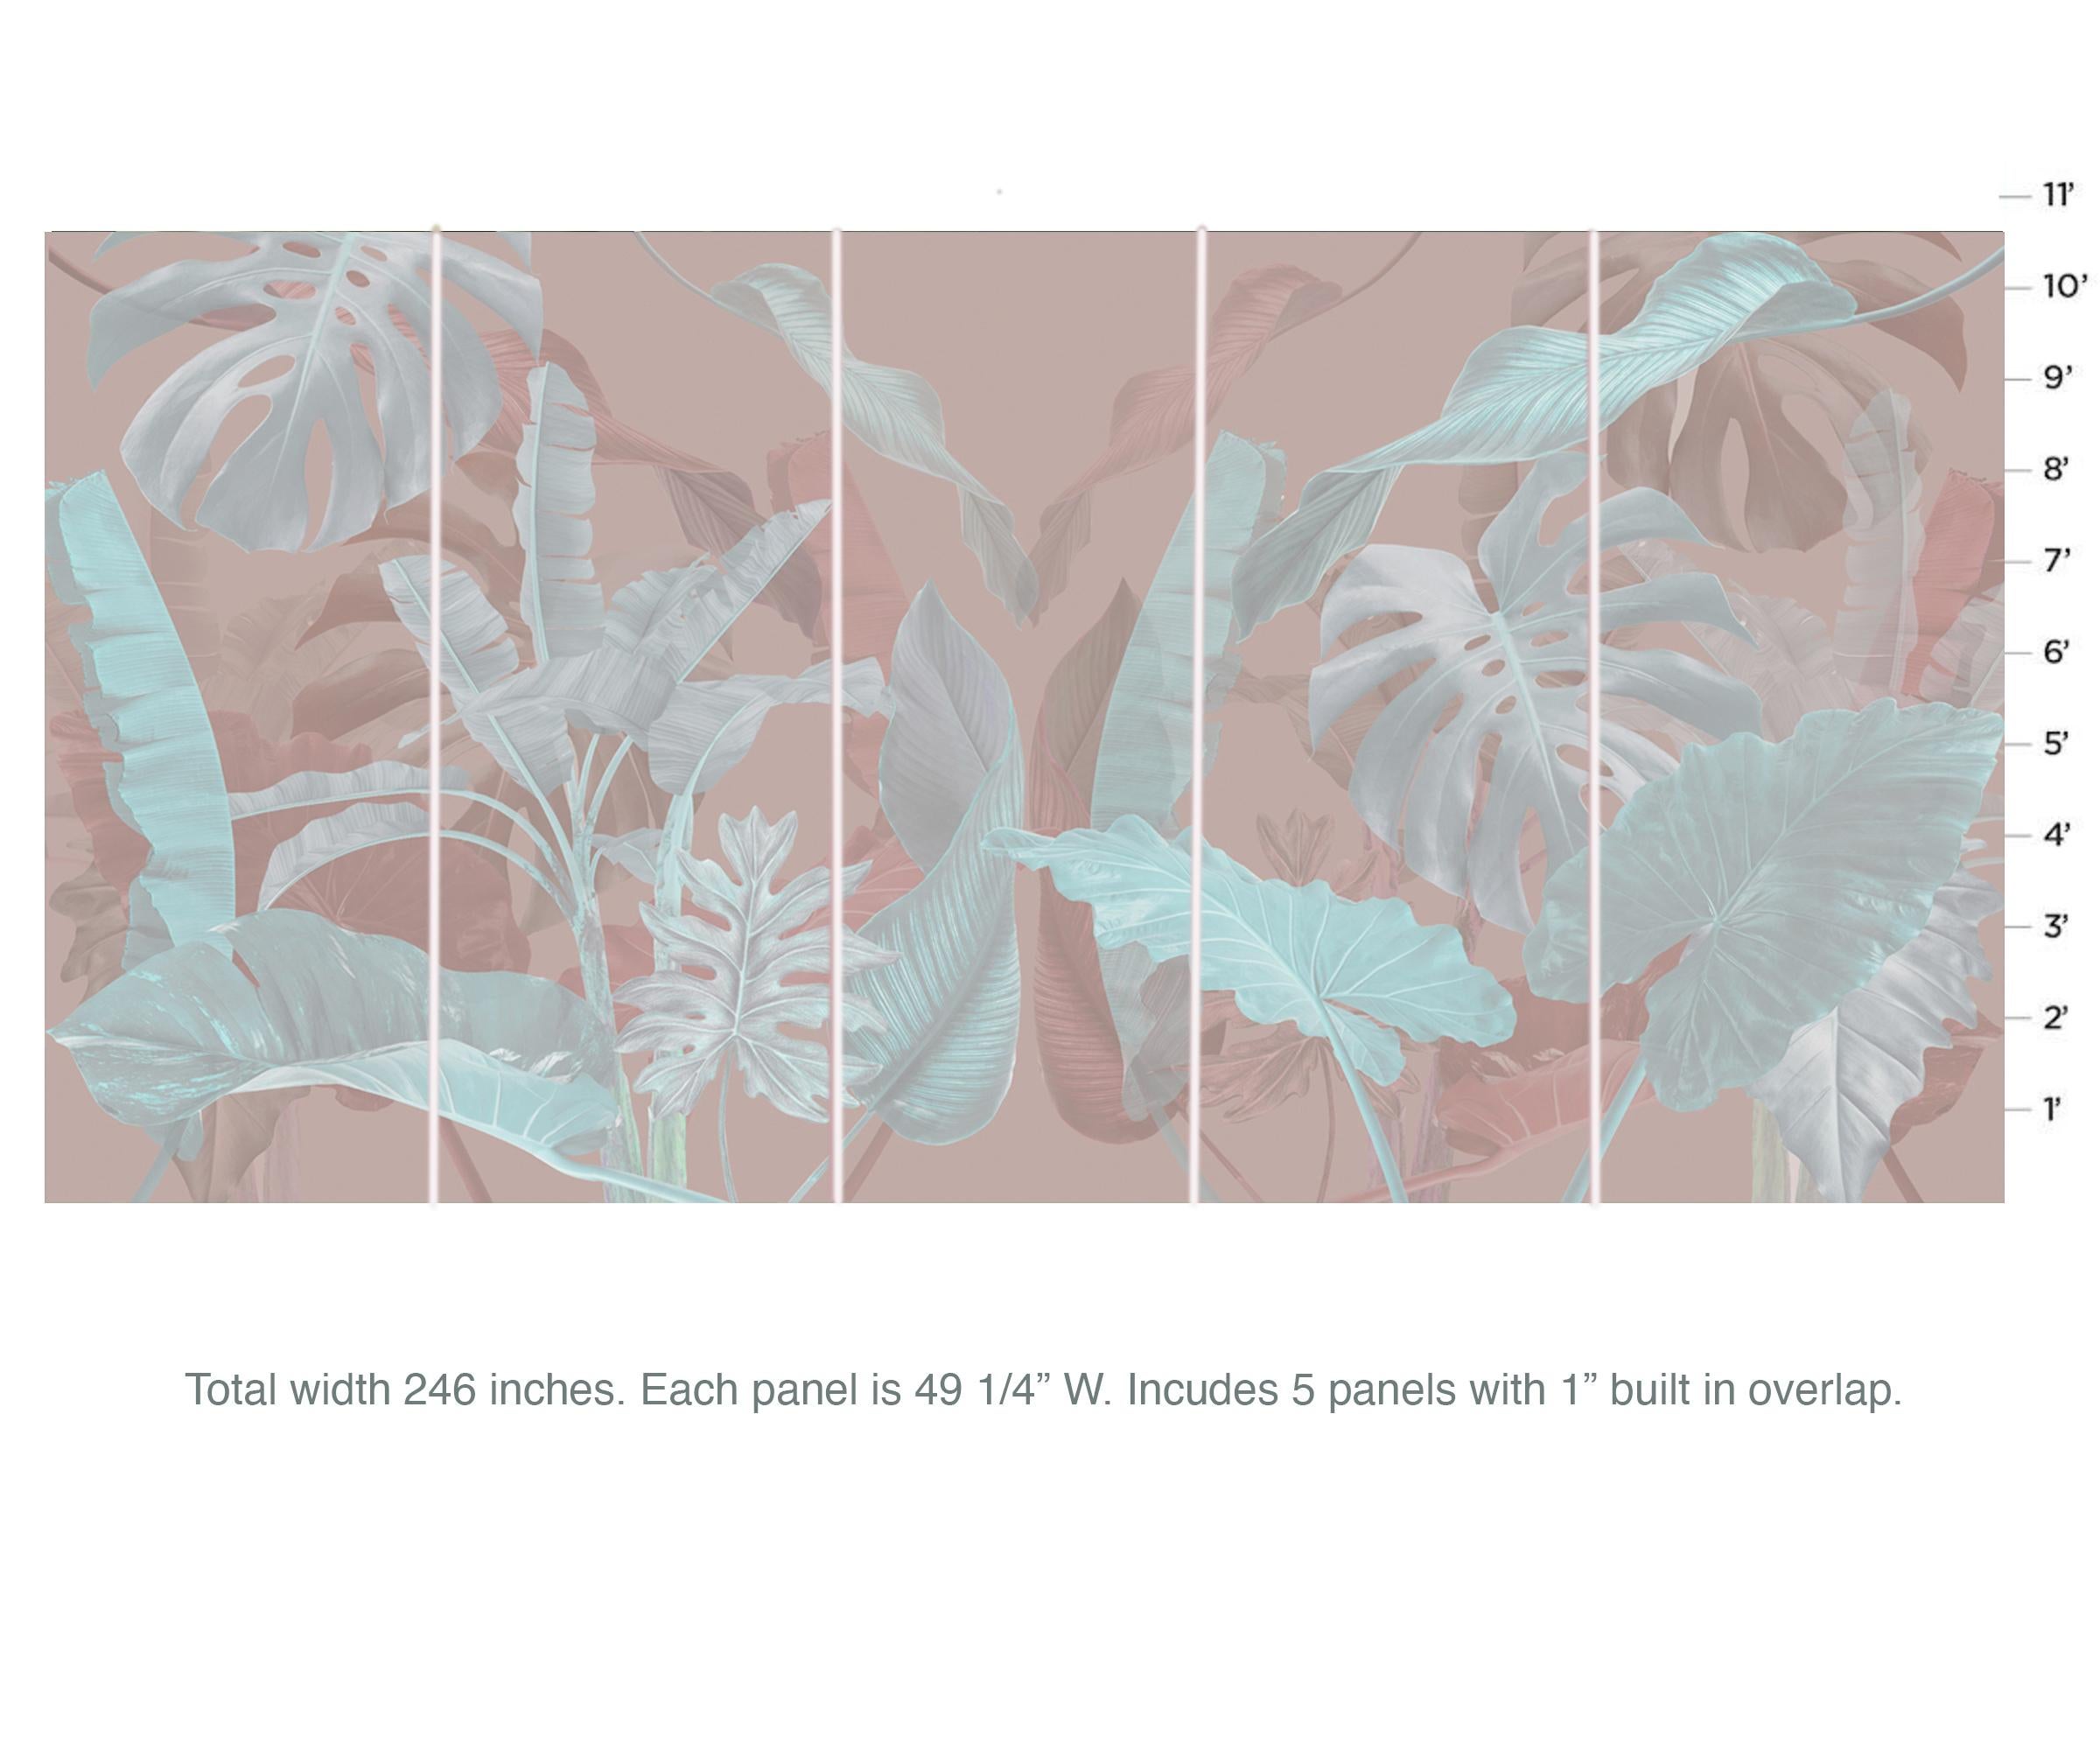 American EDGE Collections JungleScape Sundown; a whimsical nod to endless Summers For Sale